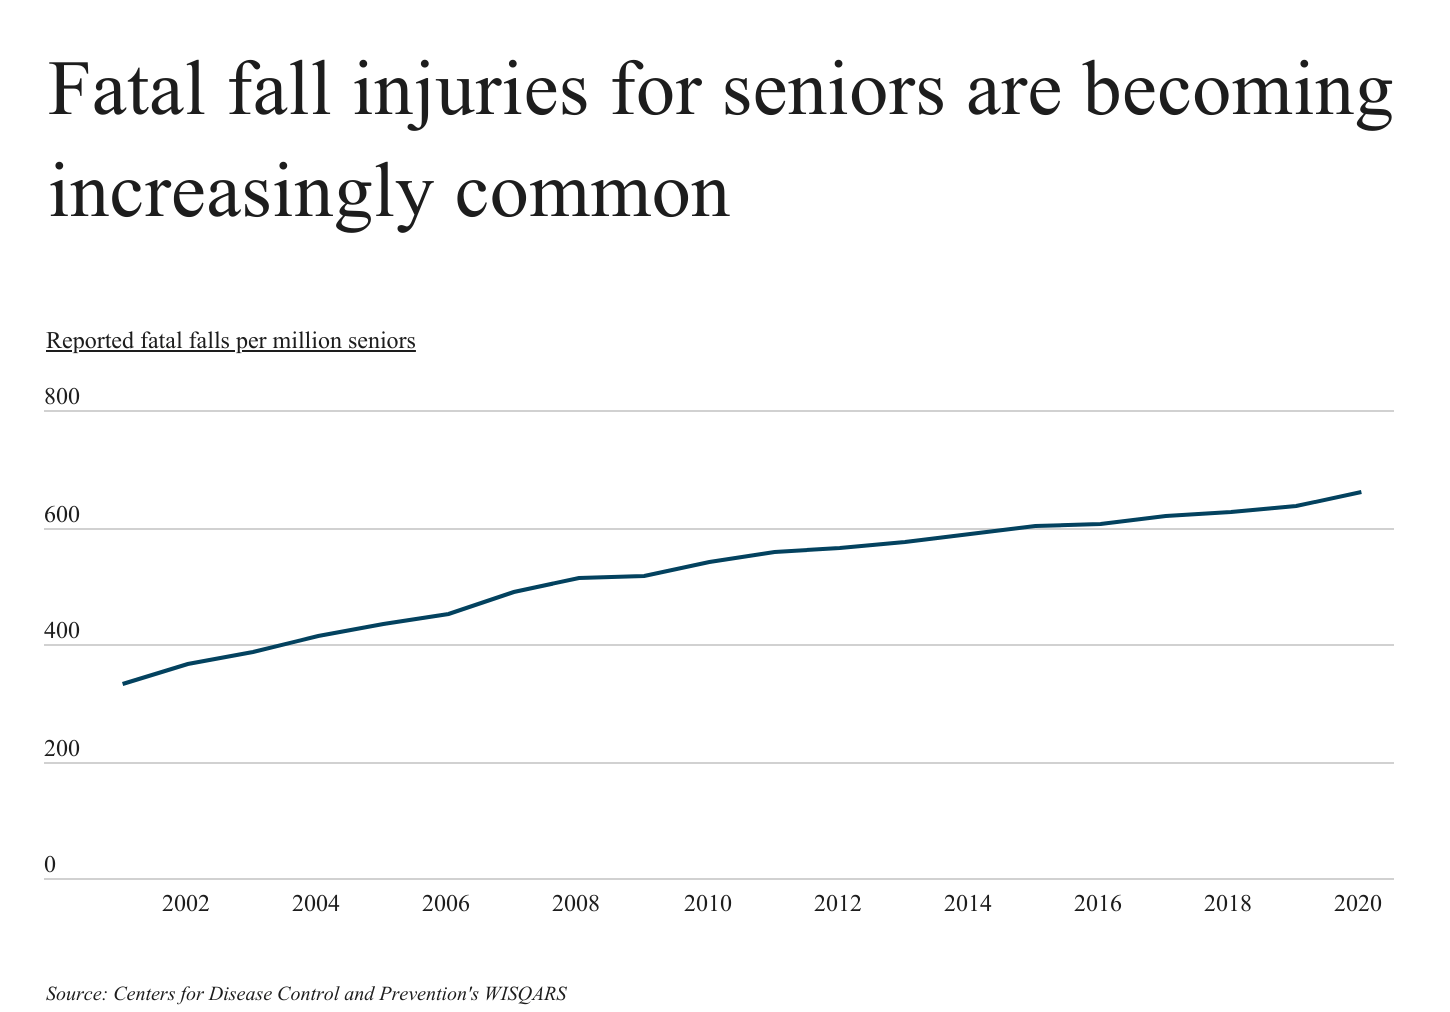 injuries for seniors are becoming increasingly common